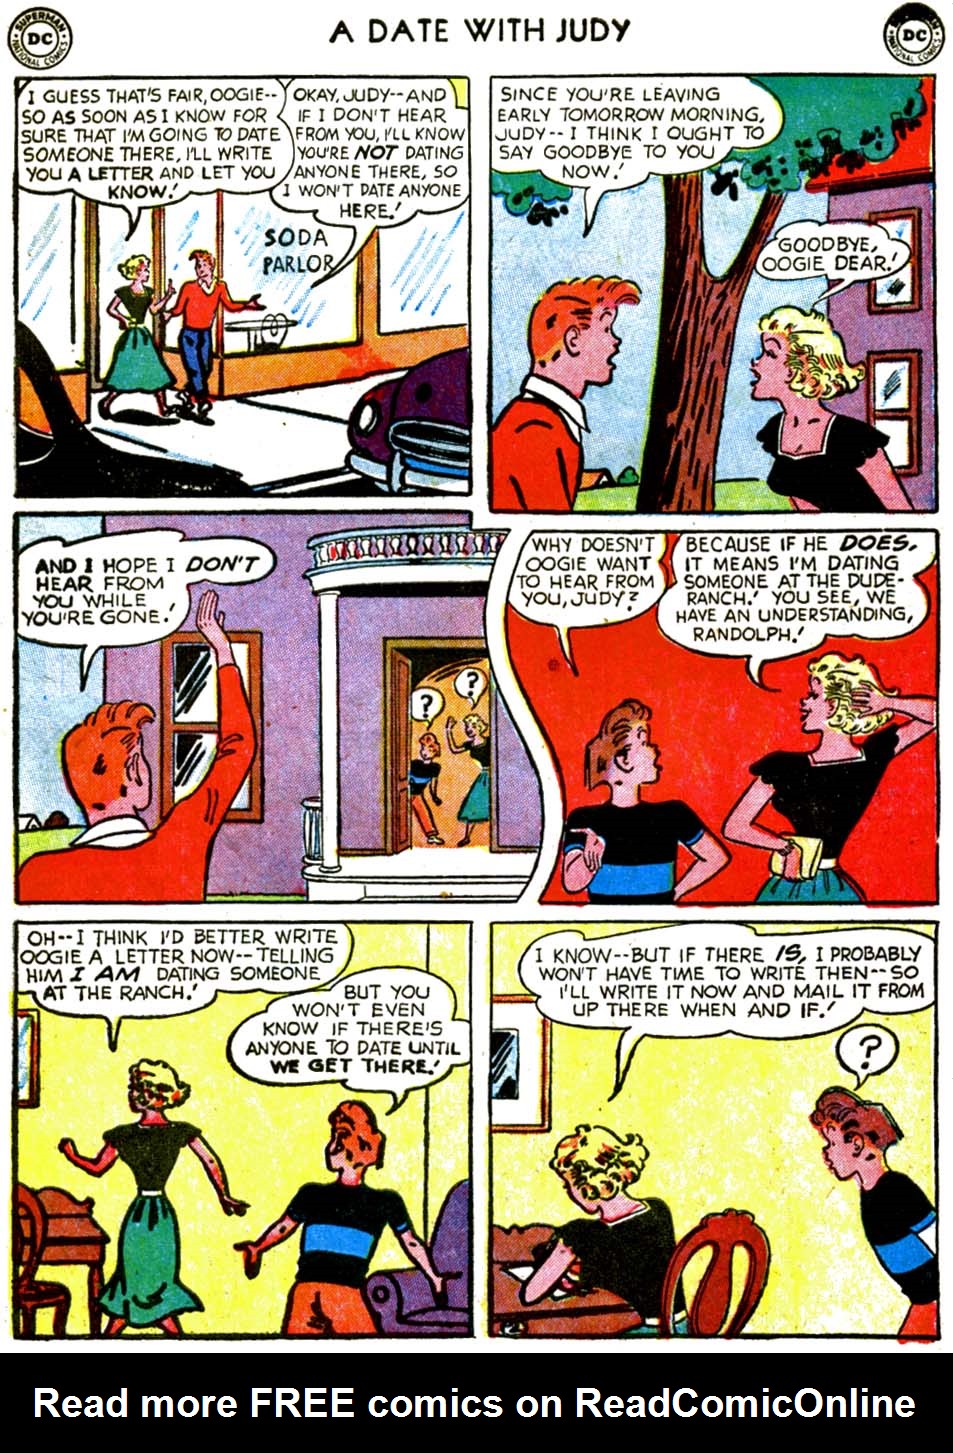 Read online A Date with Judy comic -  Issue #29 - 35